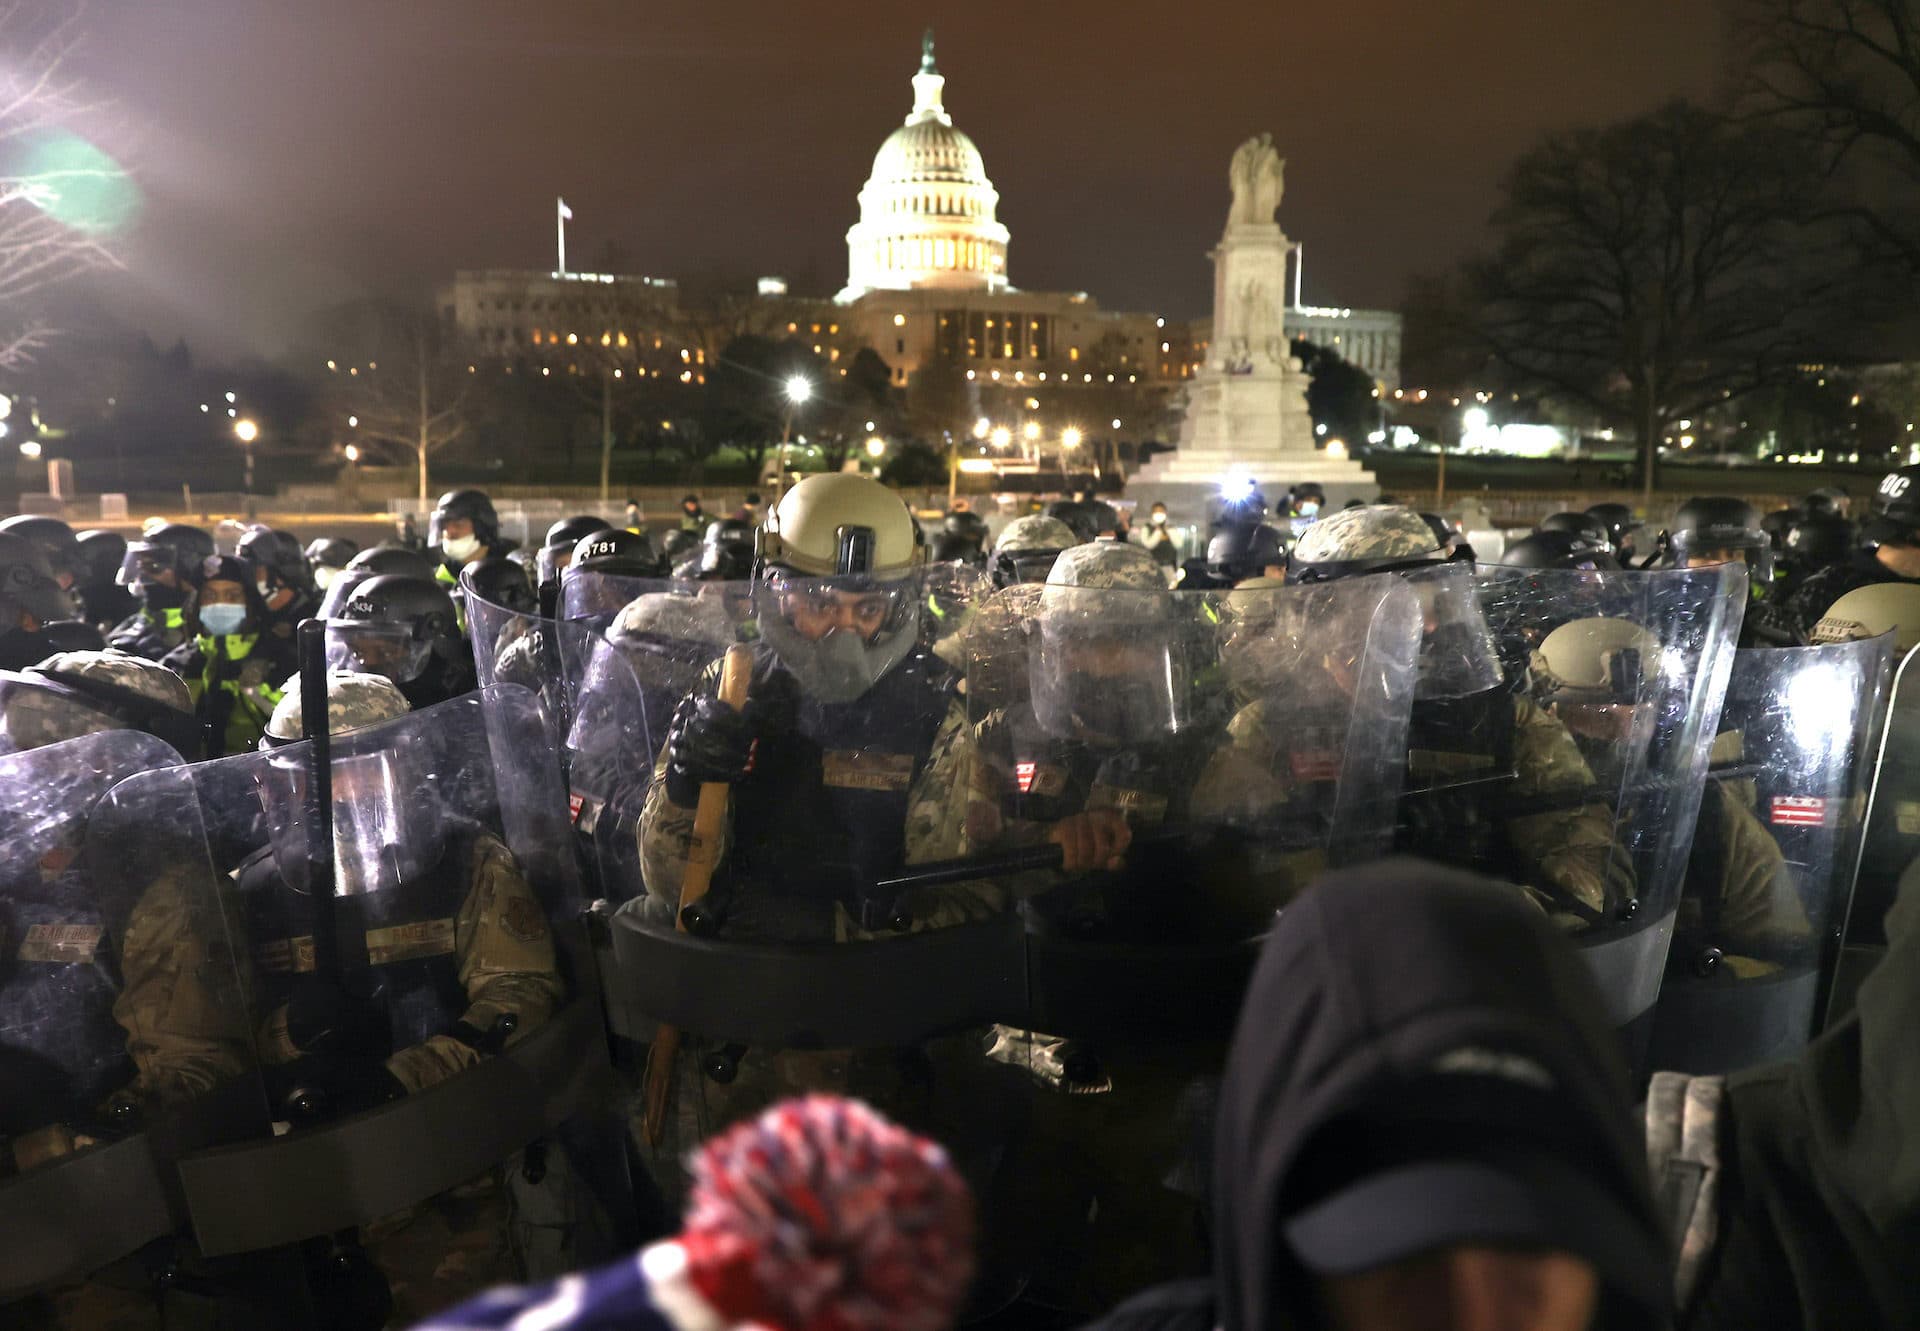 Members of the National Guard assist police officers in dispersing protesters who are gathering at the U.S. Capitol Building.(Tasos Katopodis/Getty Images)